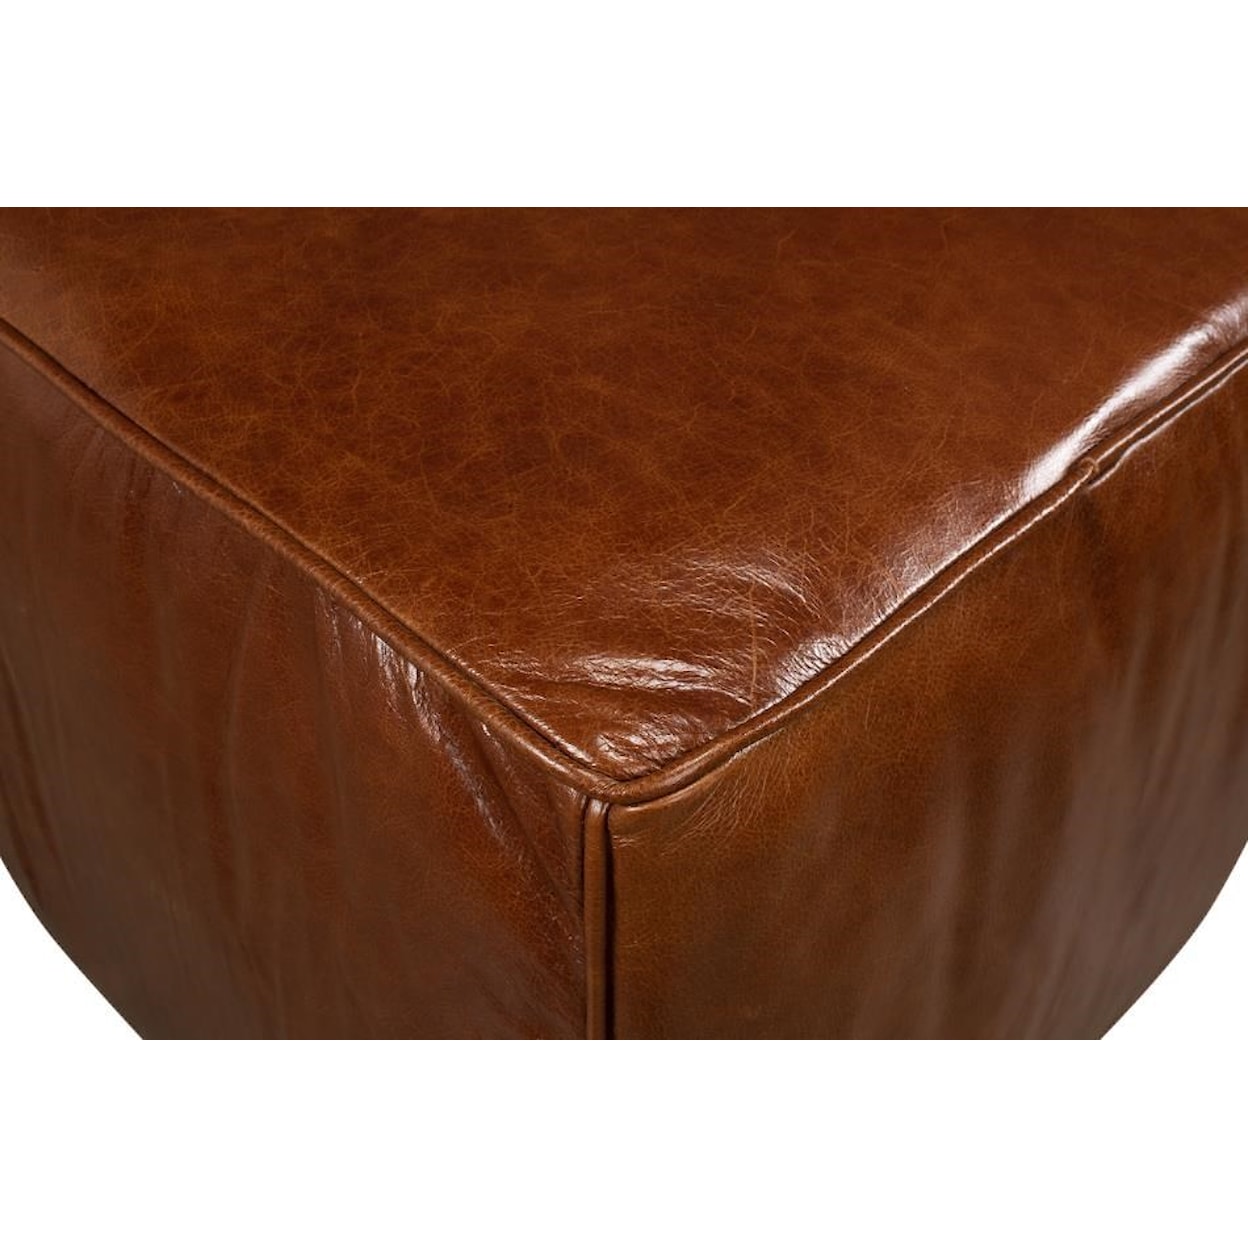 Sarreid Ltd Benches, Stools and Ottomans Leather Sitting Cube